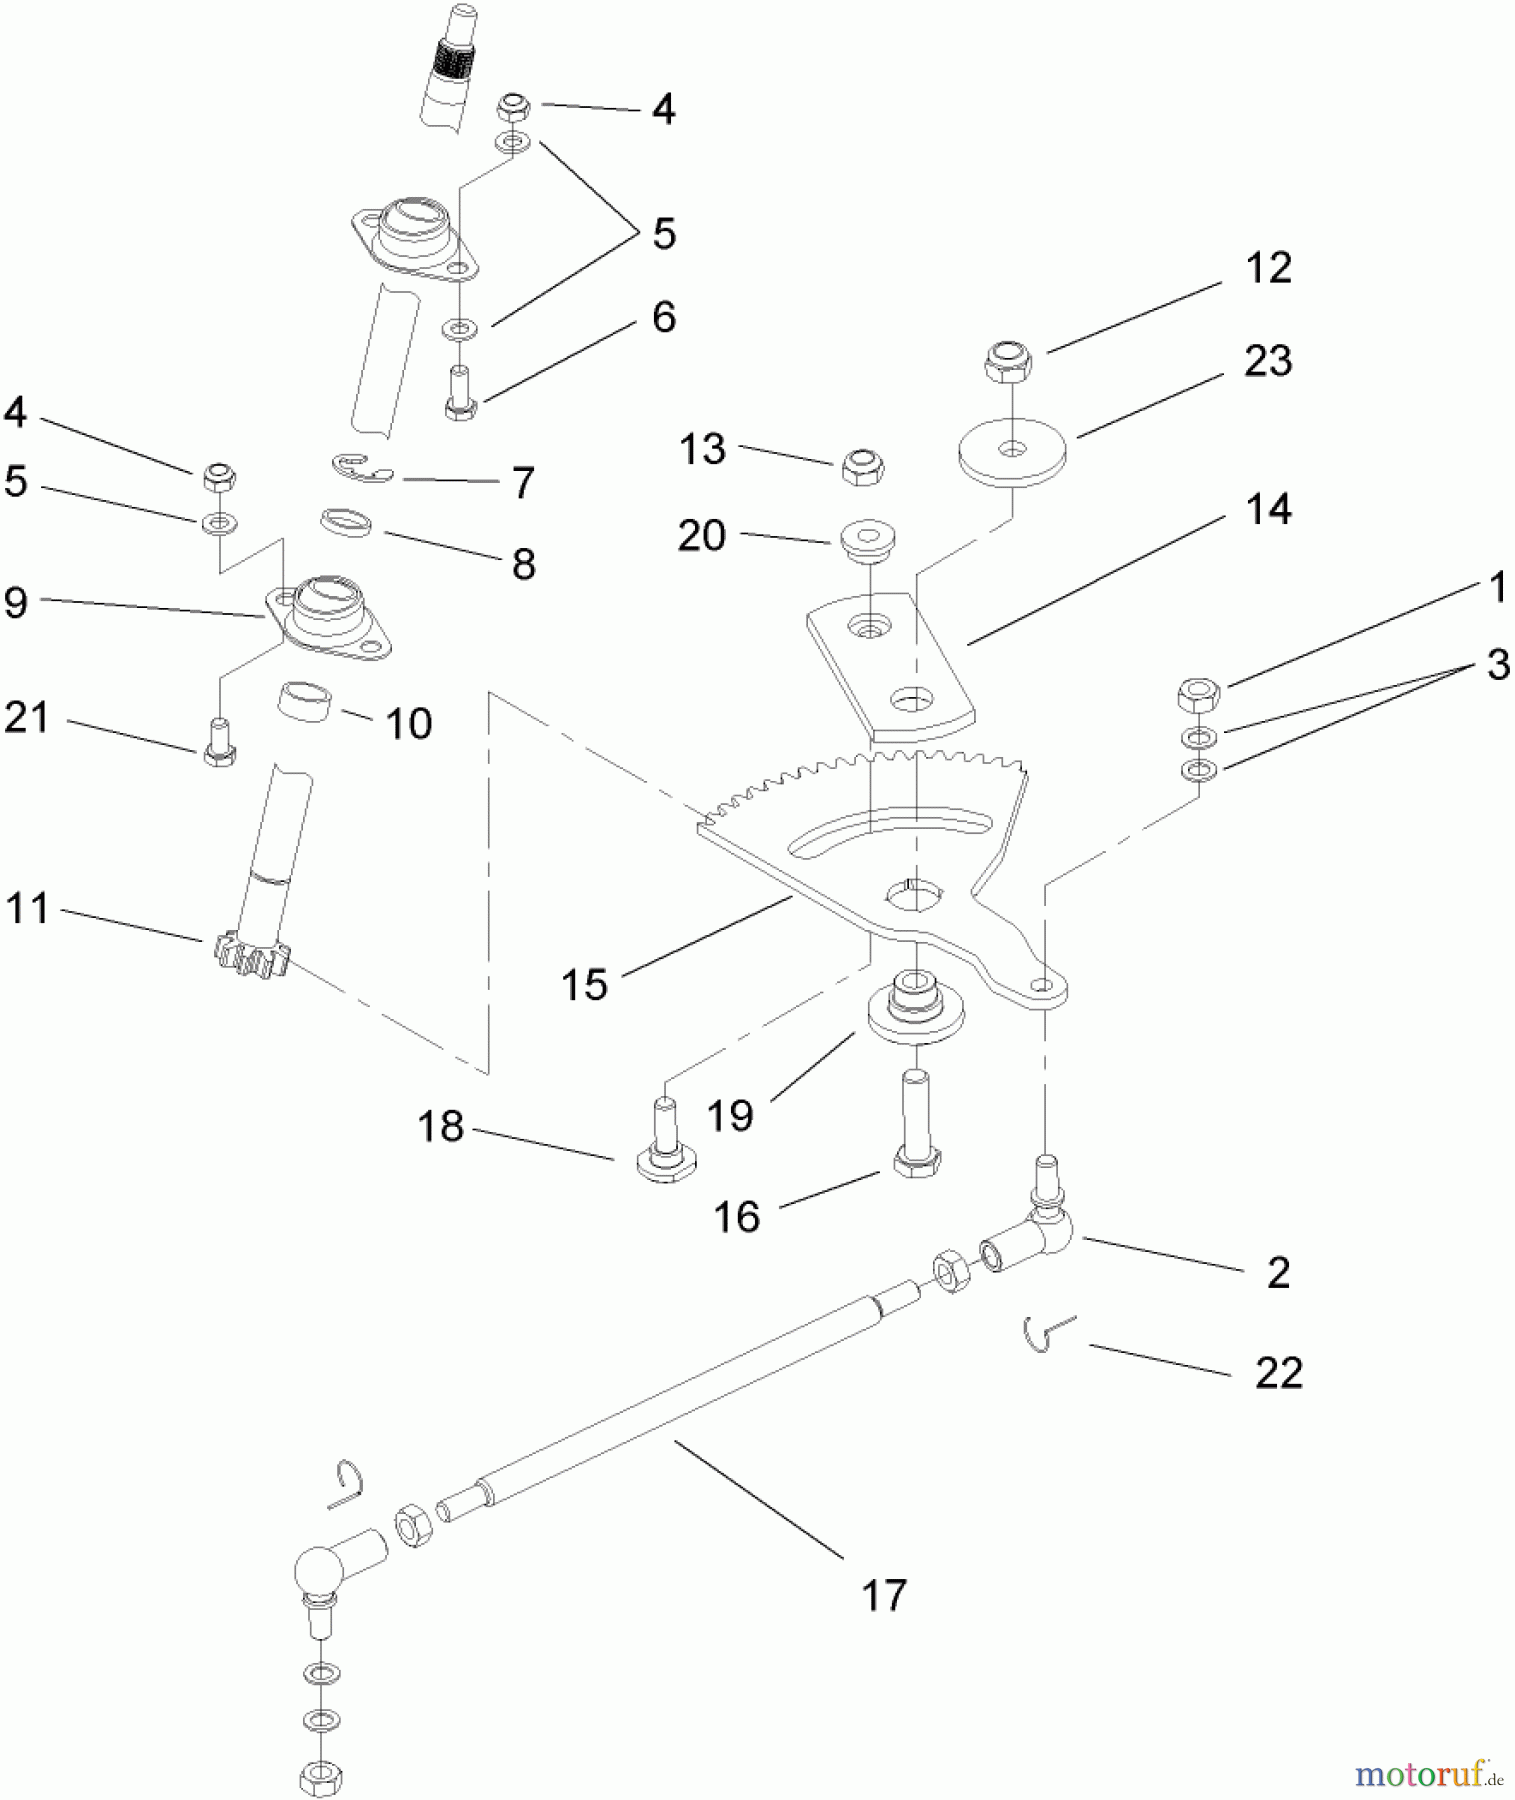  Toro Neu Mowers, Lawn & Garden Tractor Seite 1 74593 (DH 220) - Toro DH 220 Lawn Tractor, 2009 (290000001-290999999) STEERING ASSEMBLY